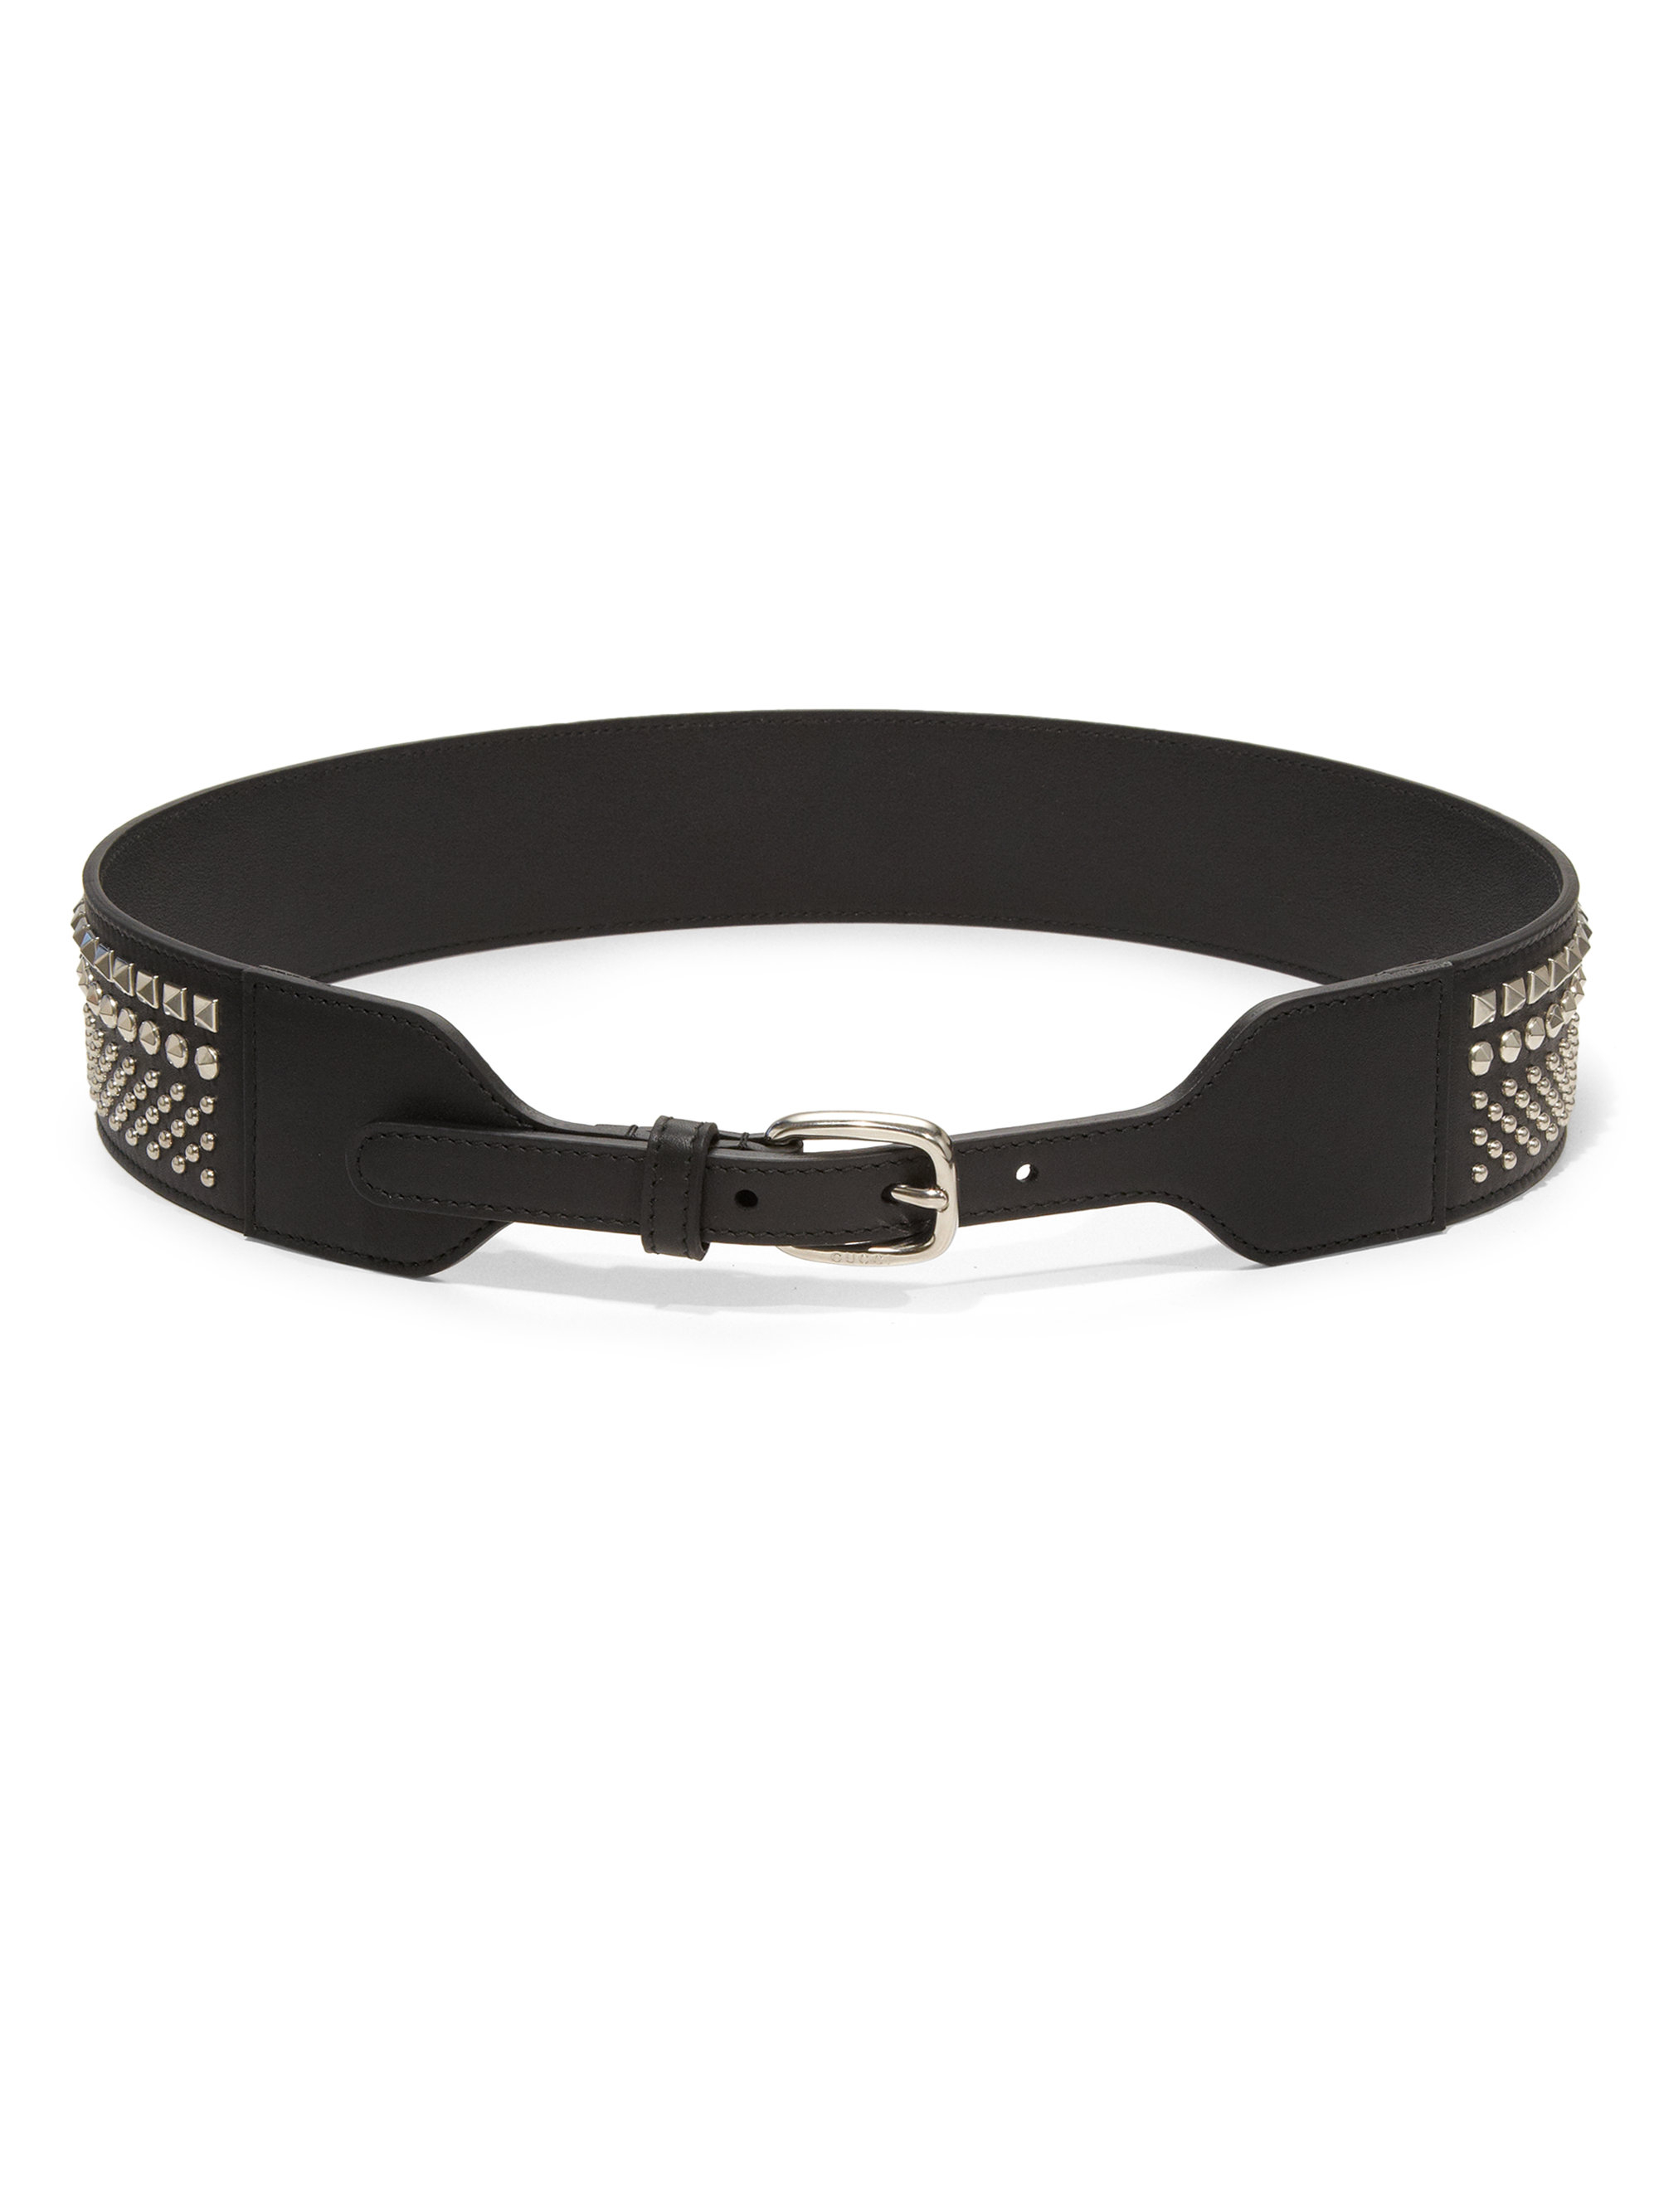 Lyst - Gucci Studded Leather Belt in Black